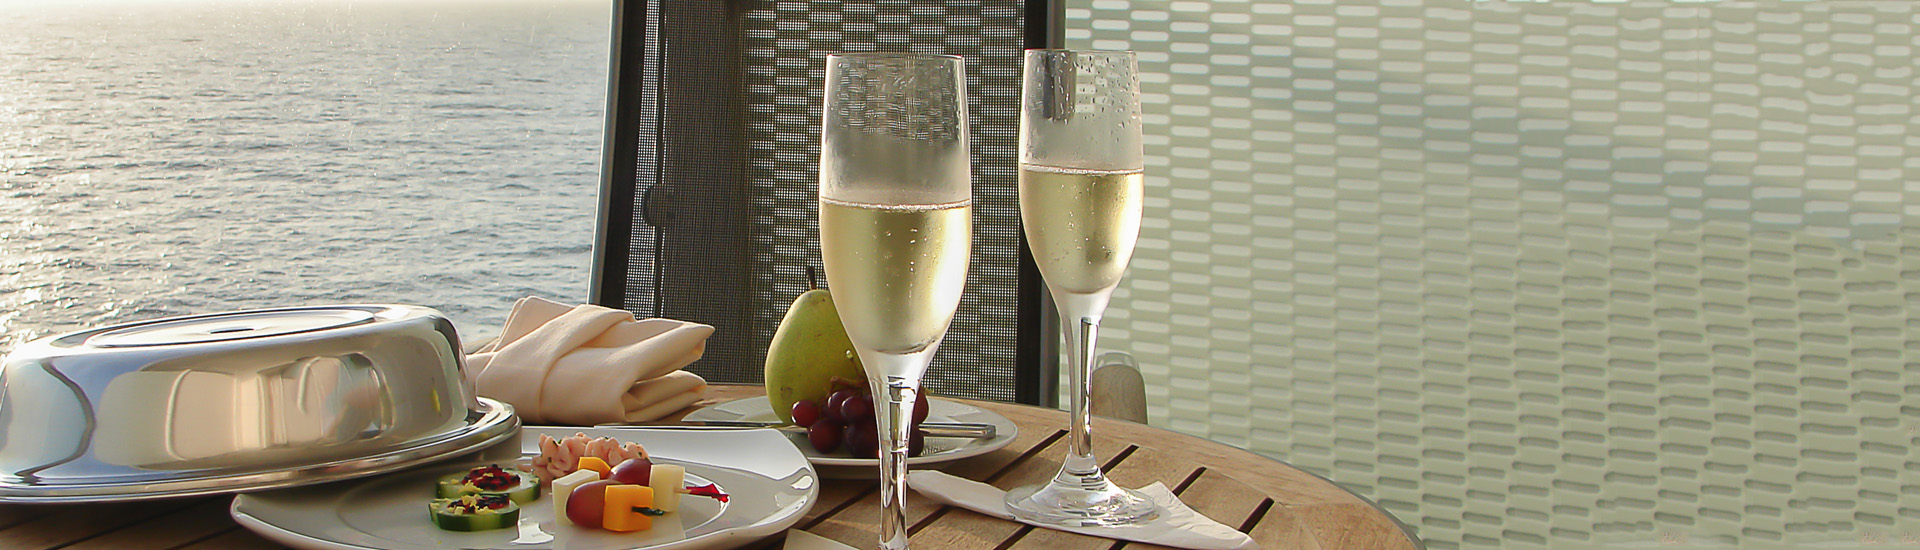 Champagne with Appetizers and Fruit